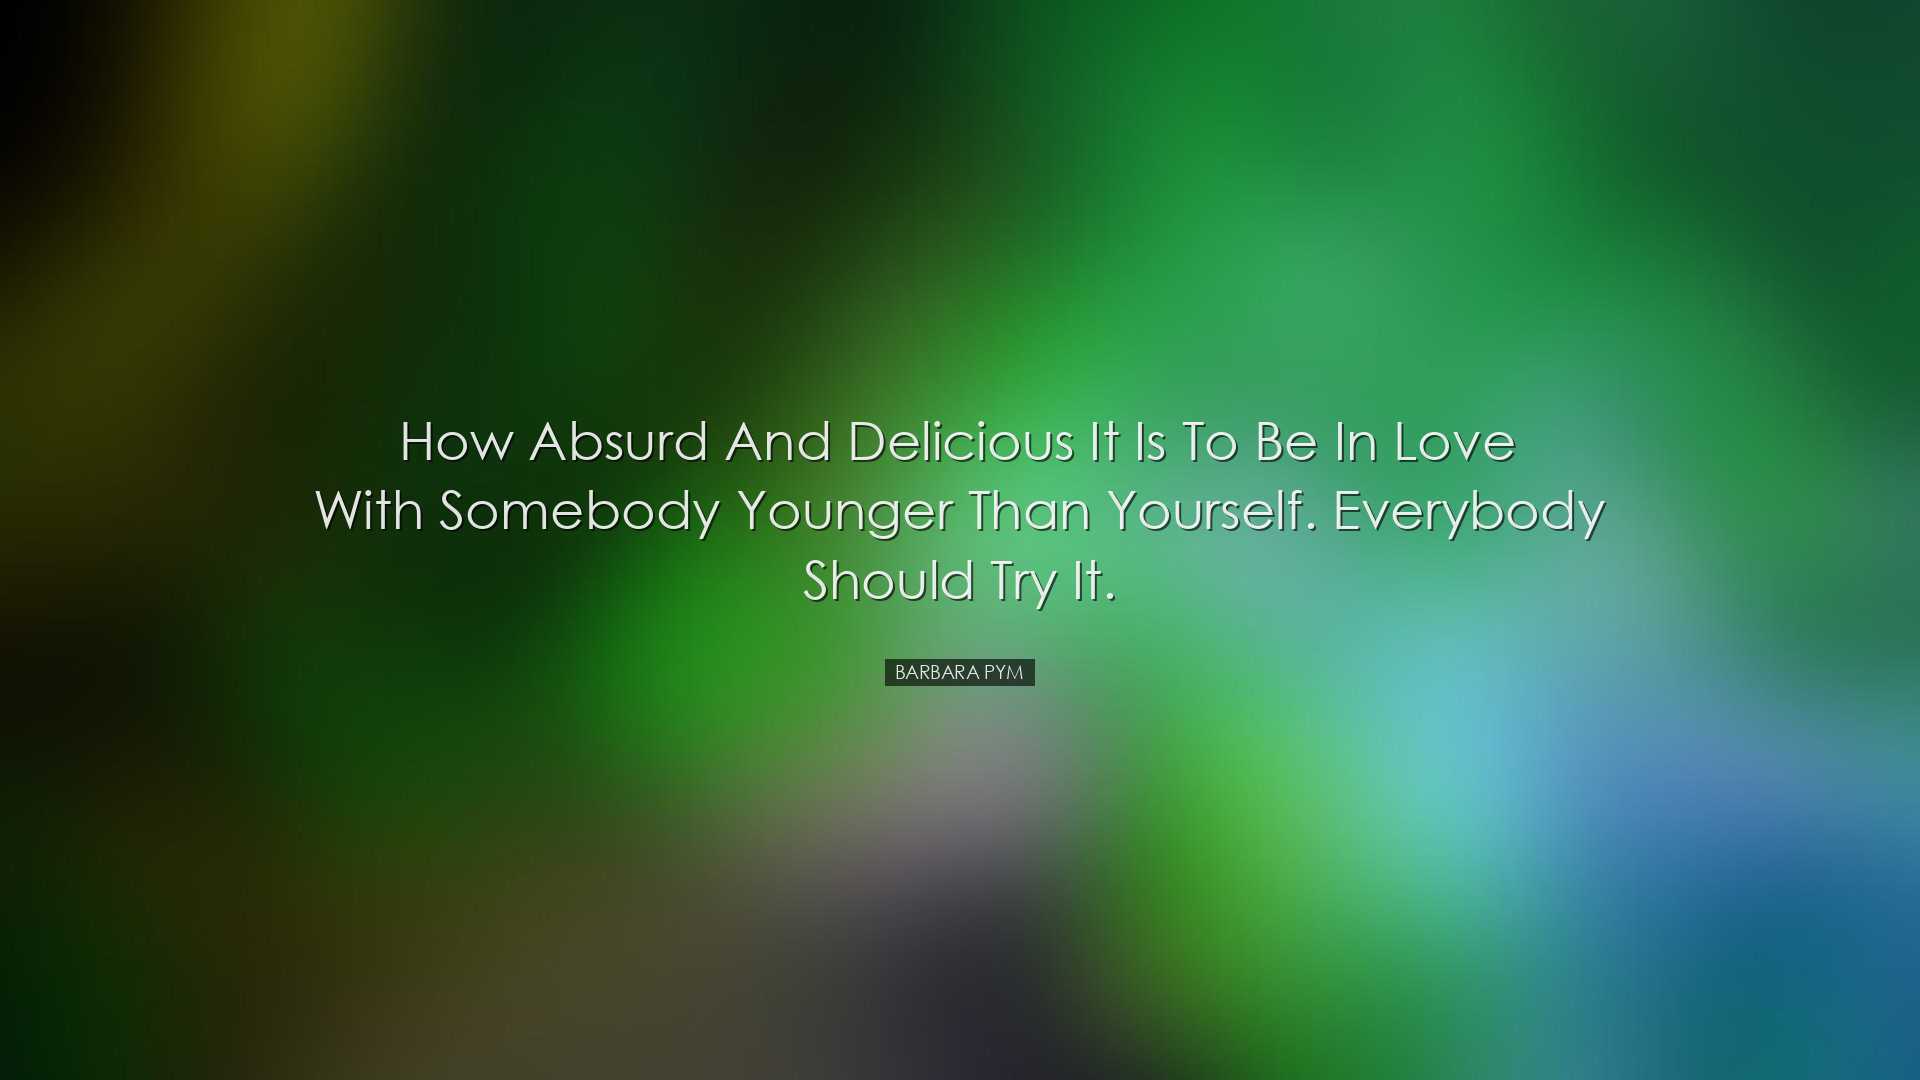 How absurd and delicious it is to be in love with somebody younger